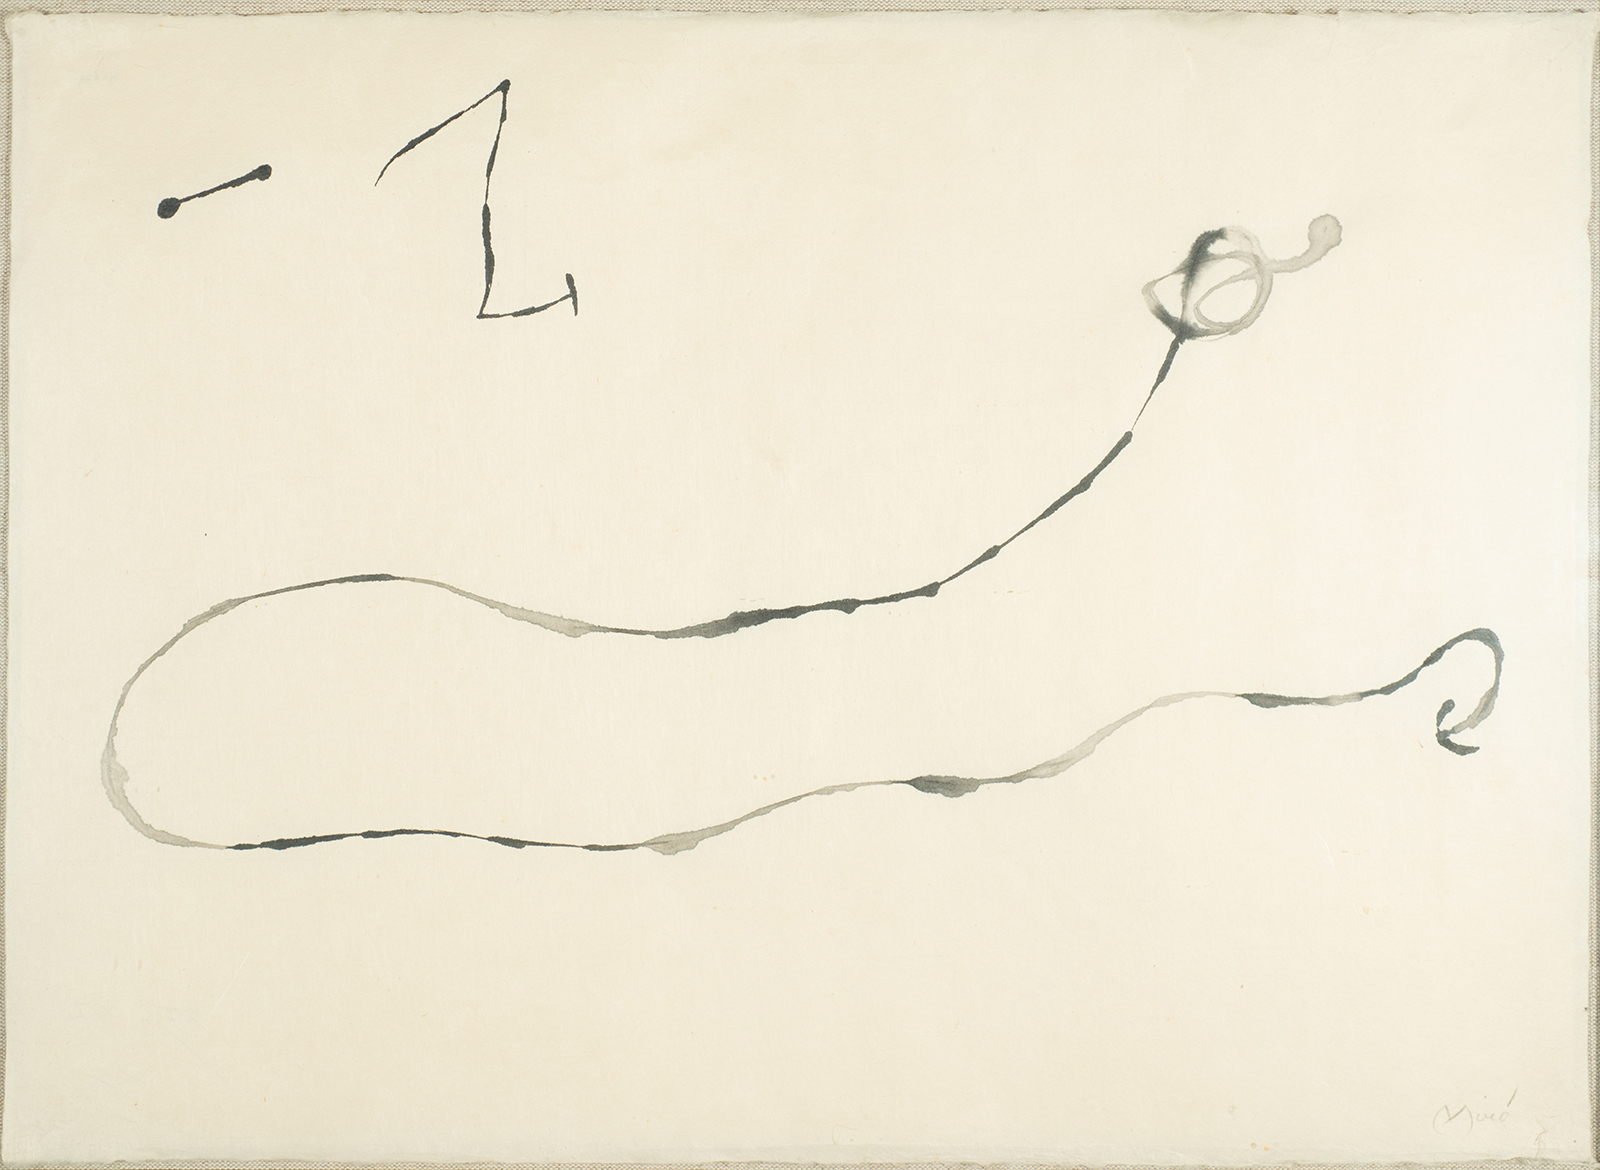 Joan Miró (1893 - 1983), "Untitled", Ink on paper - Image 2 of 3